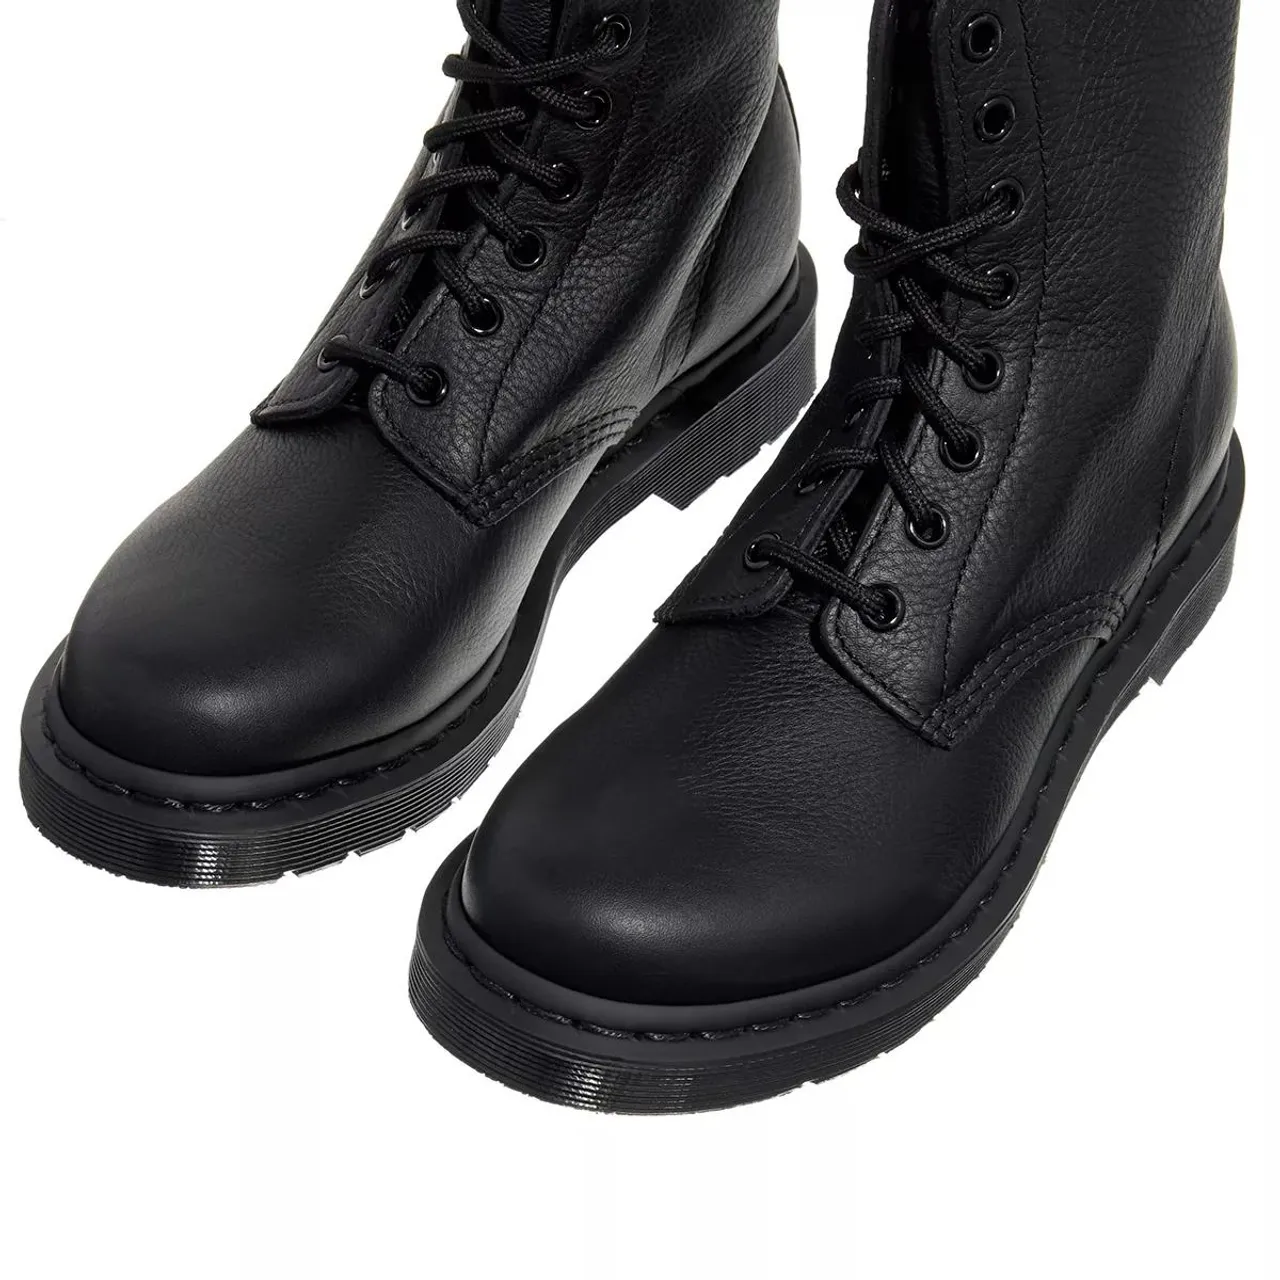 Dr. Martens Boots & Ankle Boots - 8 Eye Boot 1460 Pascal Mono - black - Boots & Ankle Boots for ladies